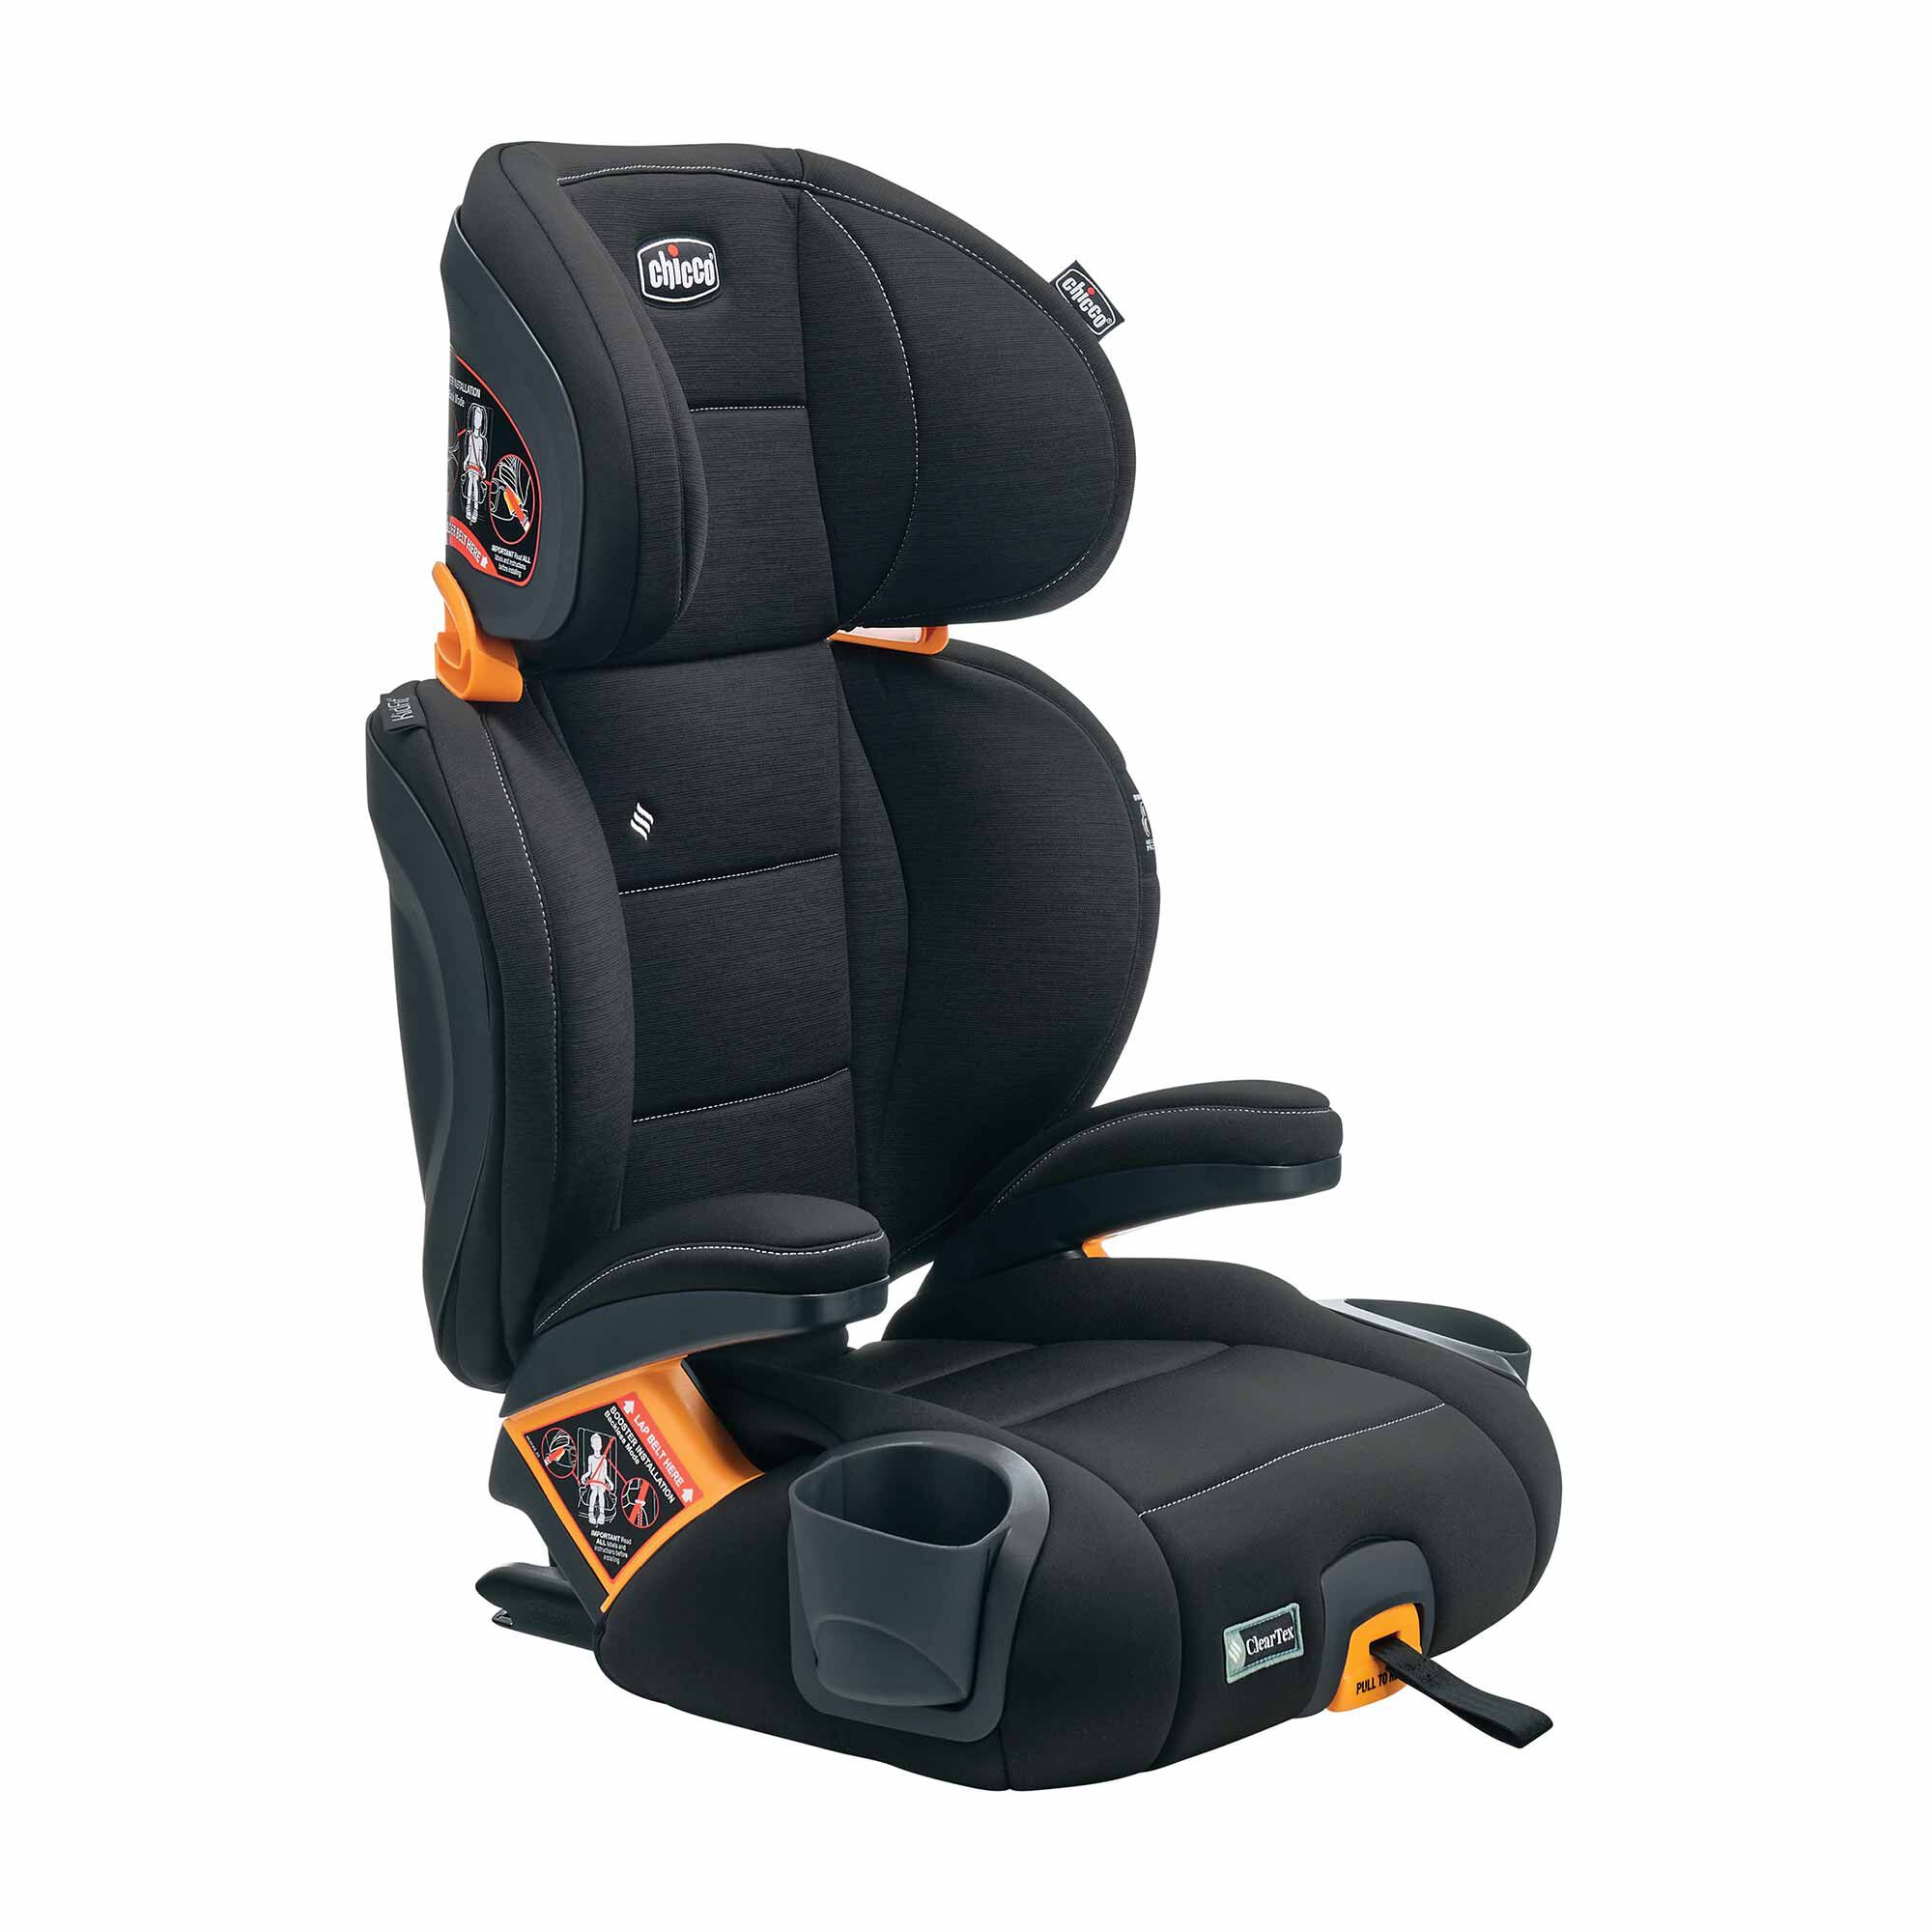 KidFit ClearTex Plus 2-in-1 Belt-Positioning Booster Car Seat - Obsidian |  Chicco